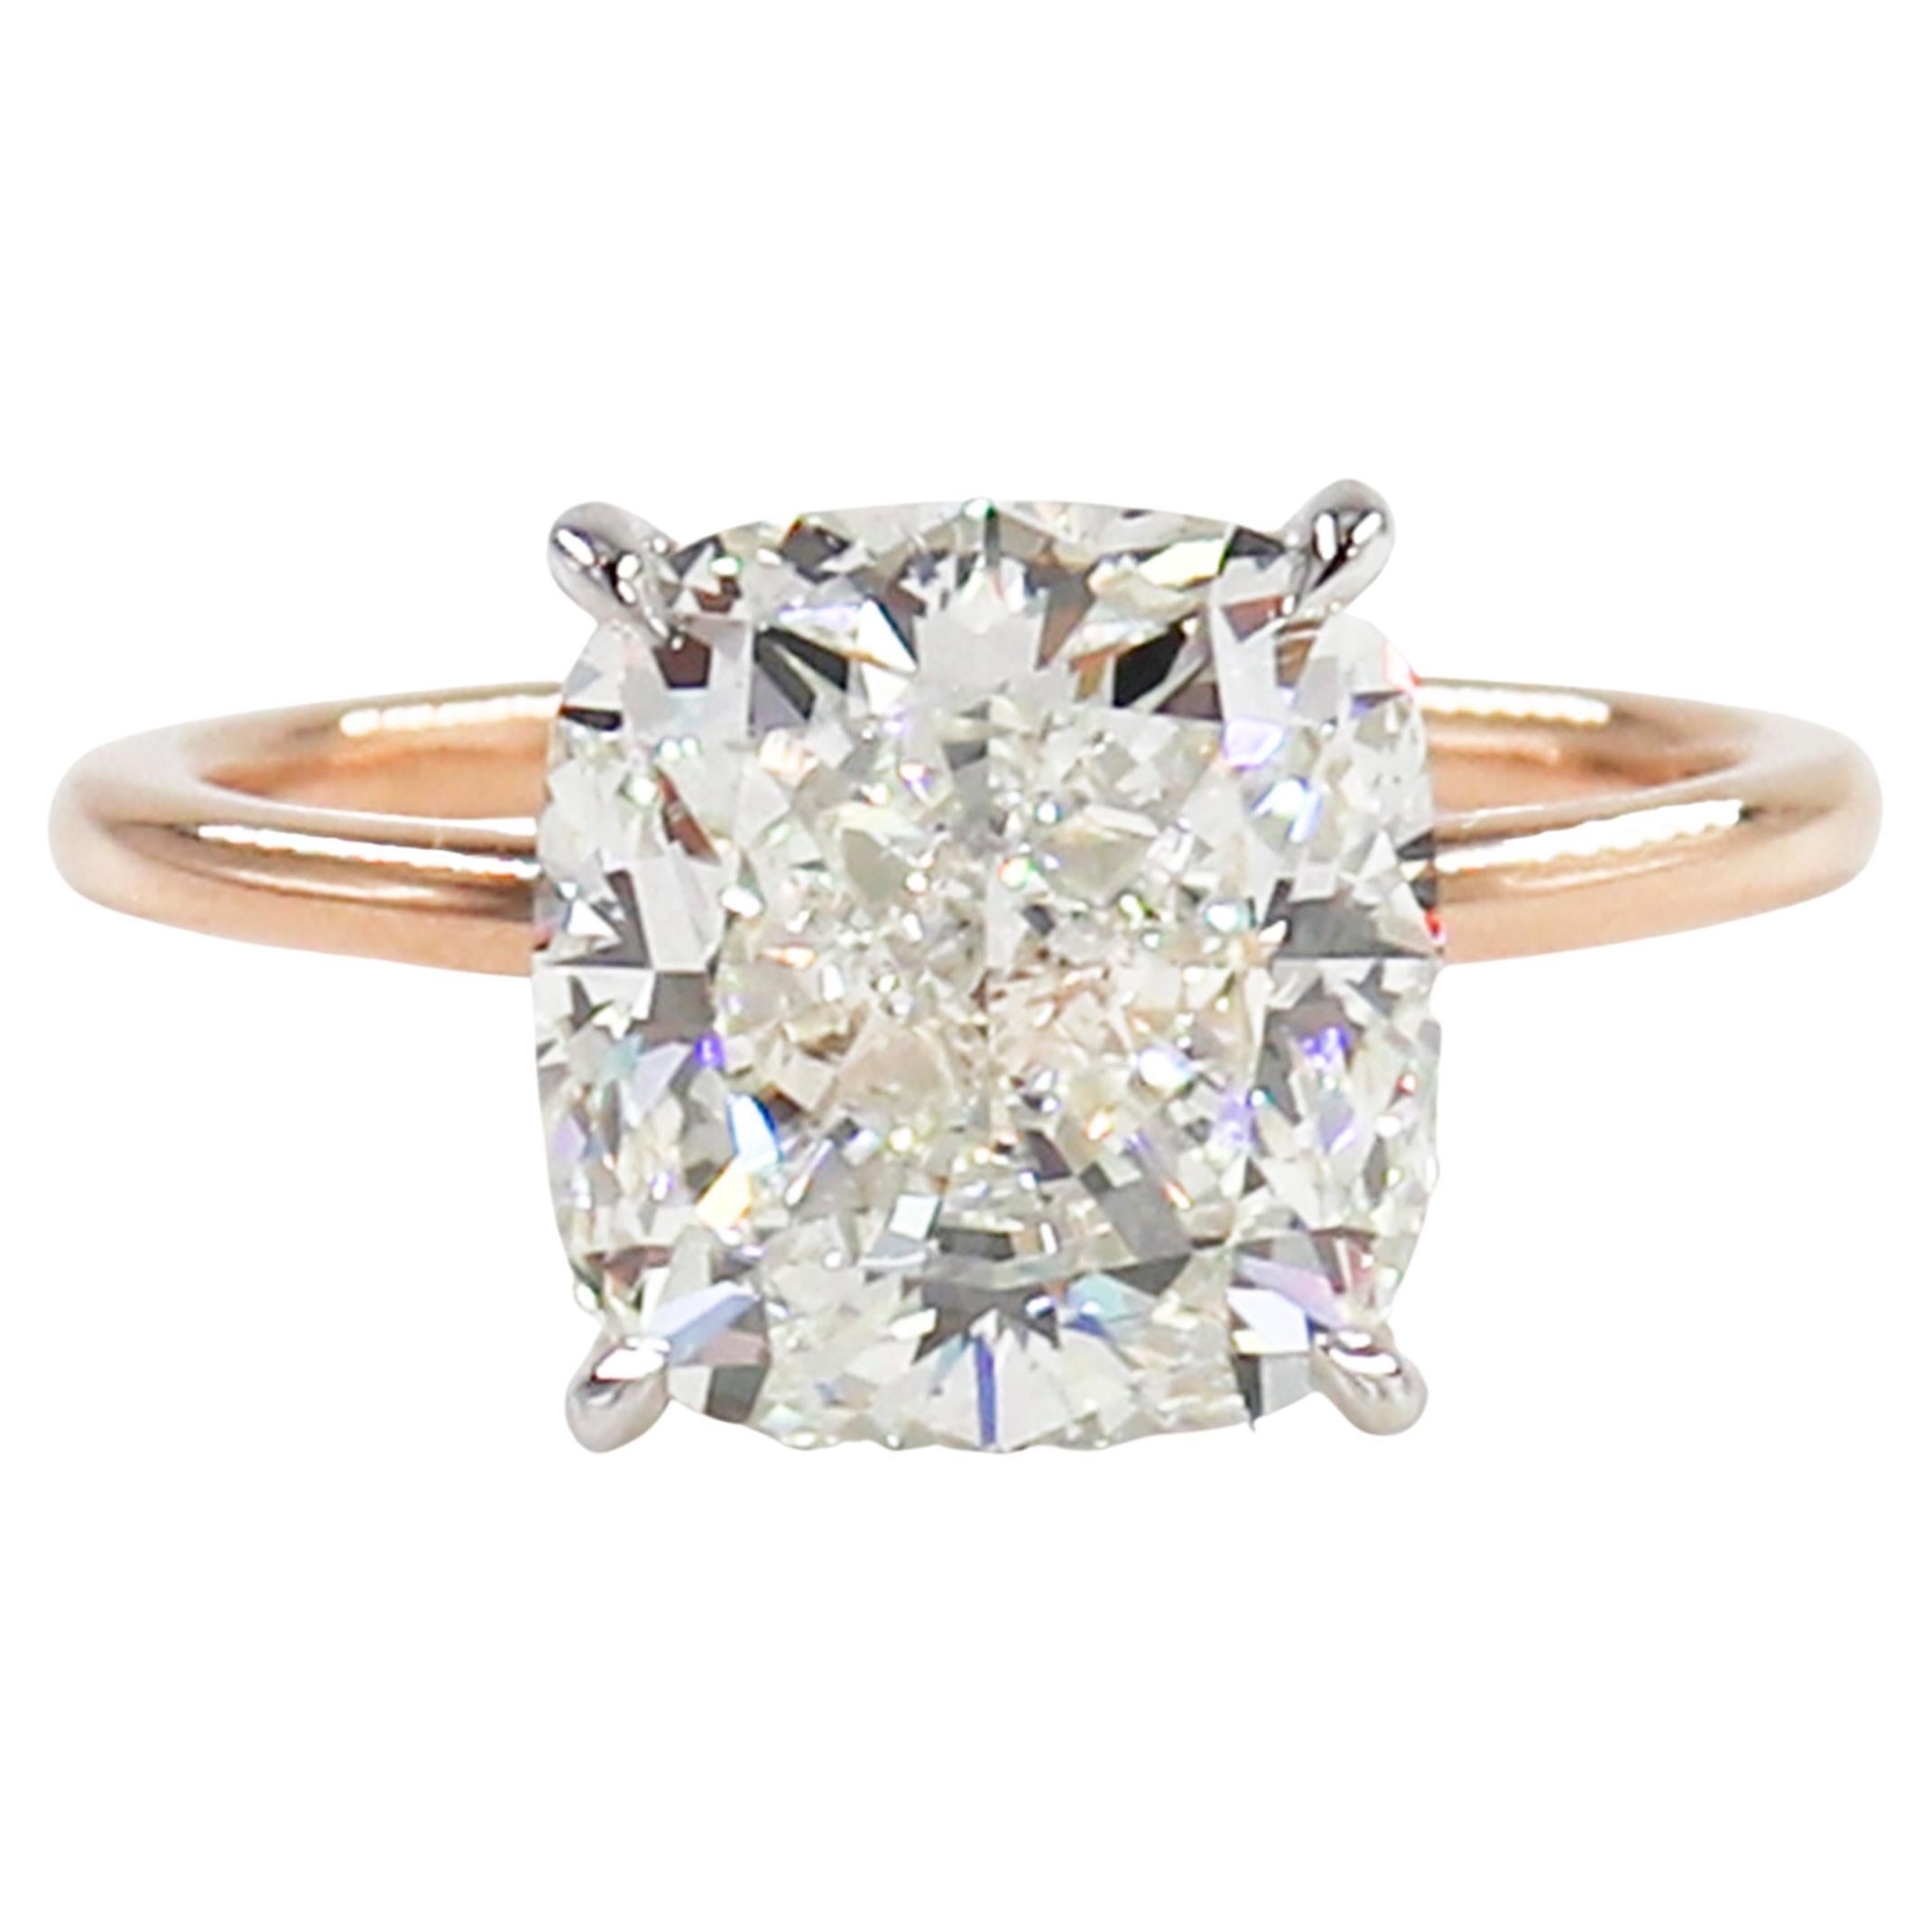 Simple, sleek and sparkly, this elegant solitaire is a timeless choice for an engagement ring! This piece features a 5.03 carat cushion cut diamond certified by GIA to be J color and VS2 clarity. This beautiful, slightly elongated shape is very